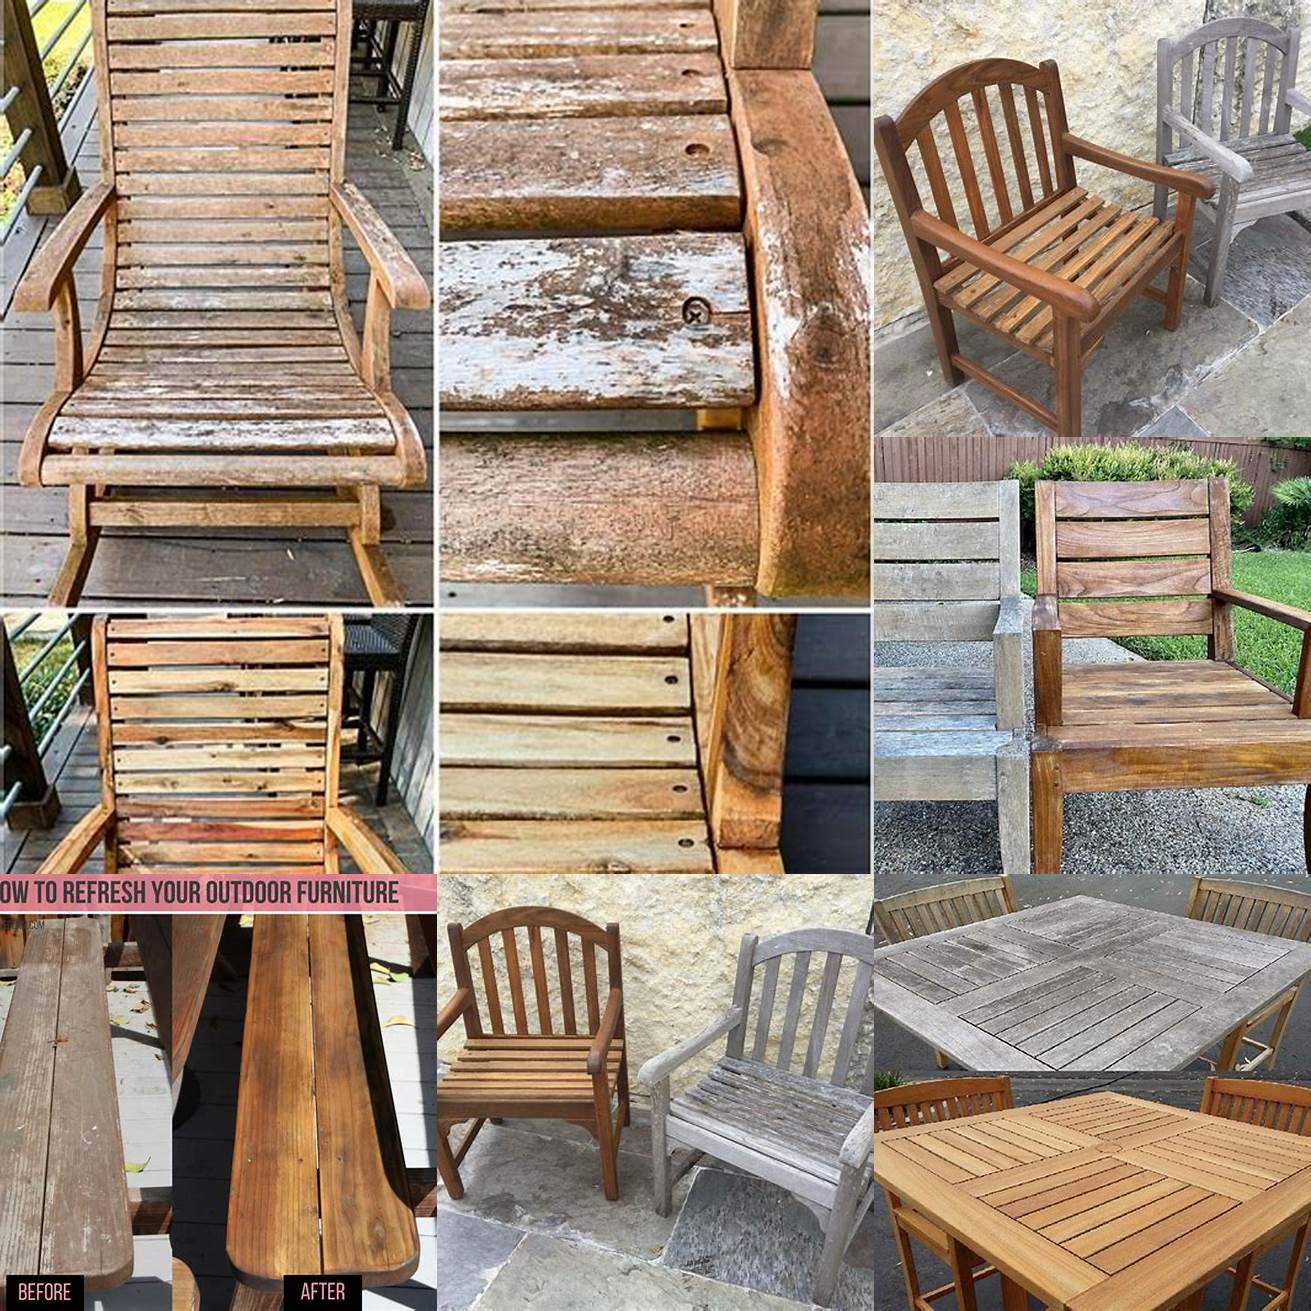 Before and after shots of the teak furniture